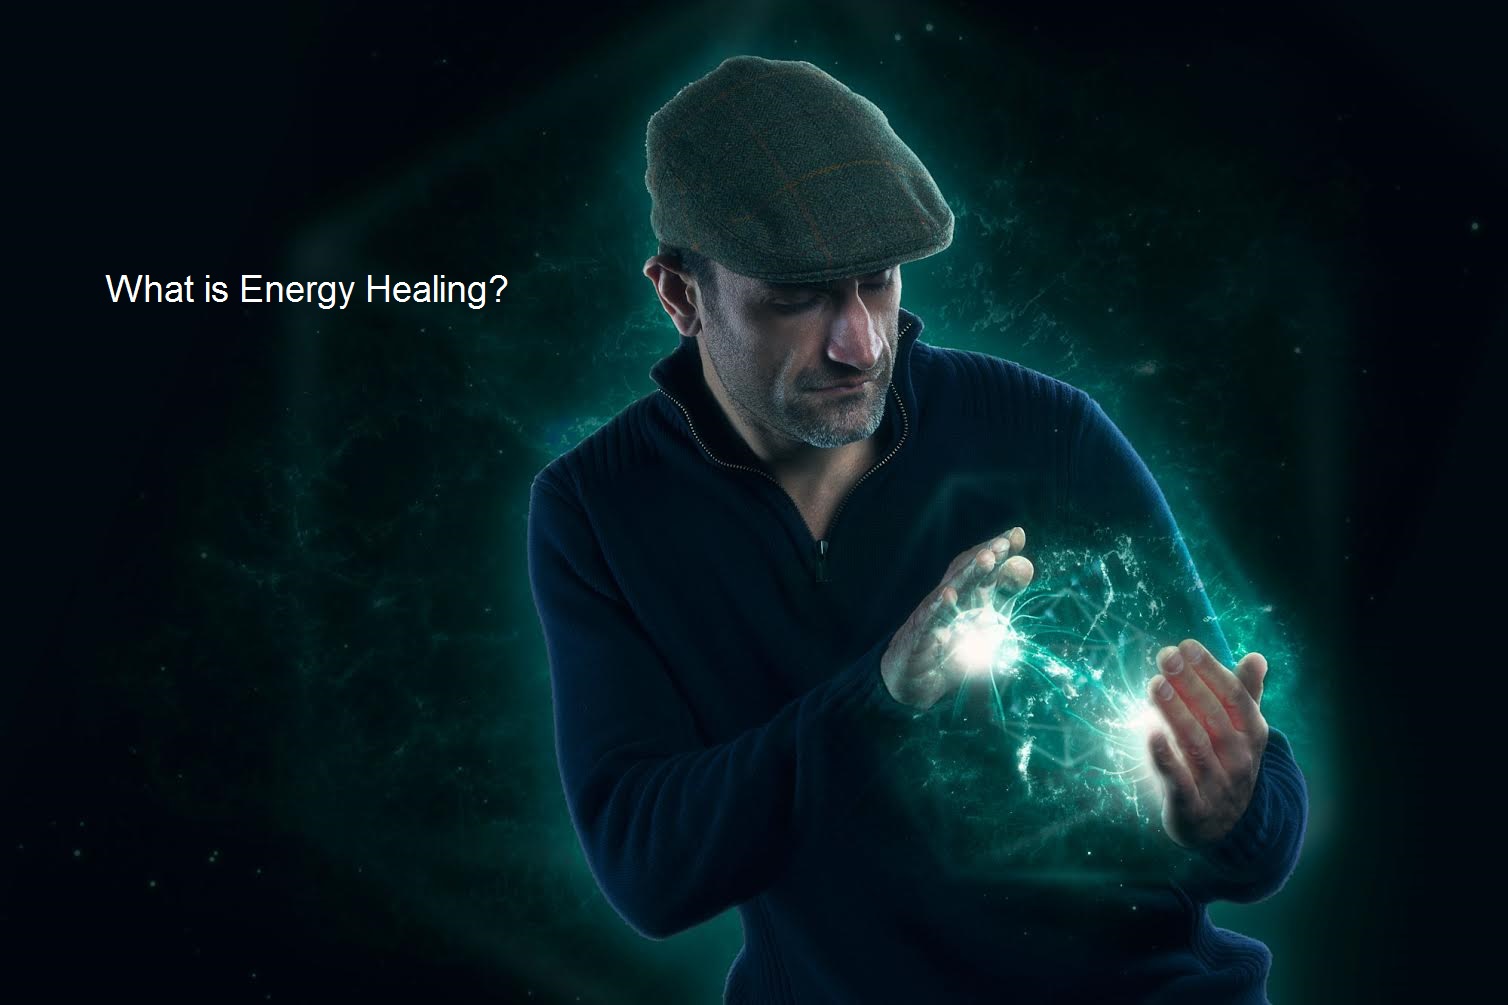 What is energy healing?